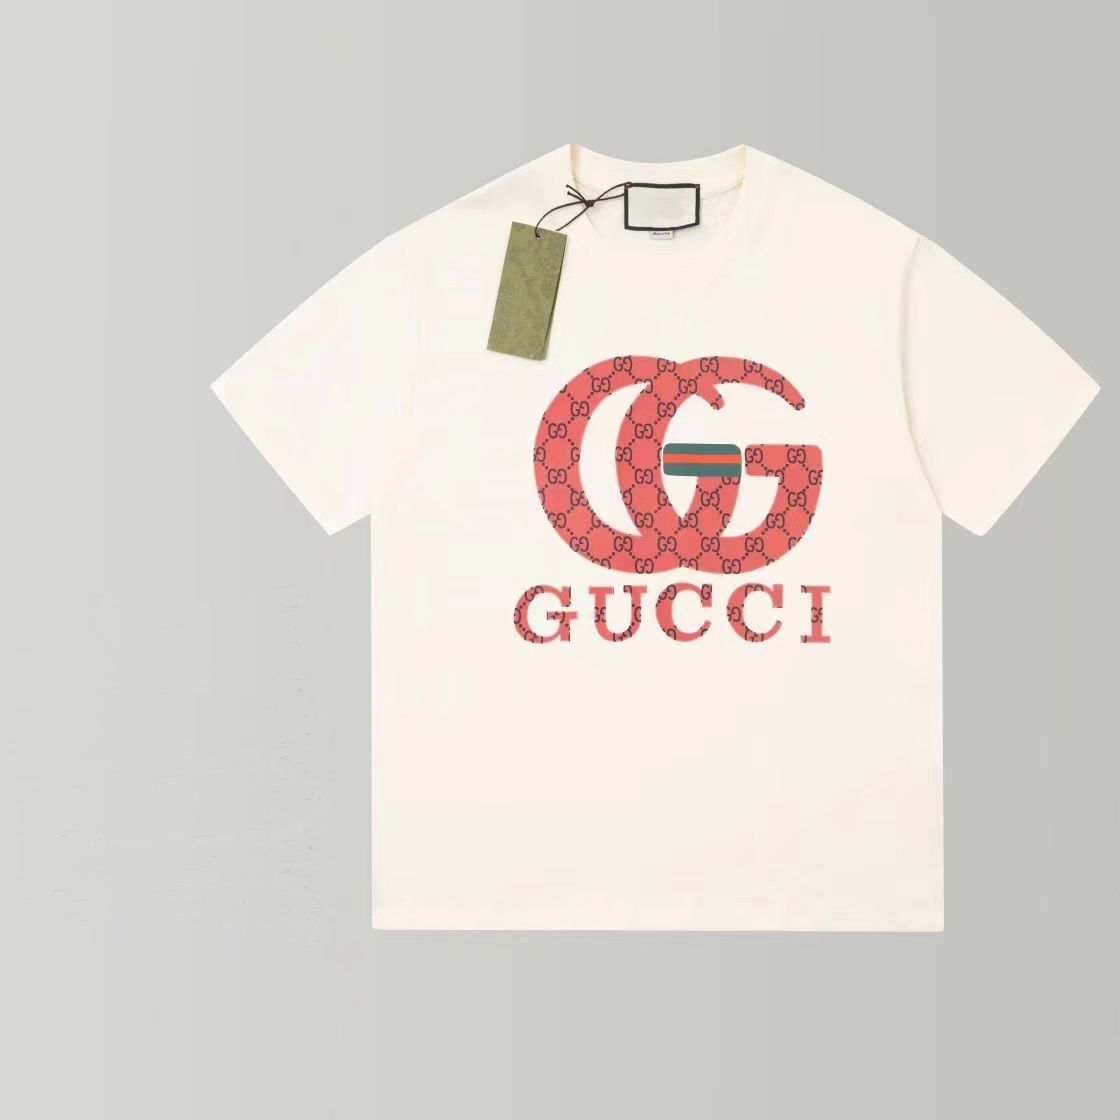 Gucci Summer New Doule G Printed Unisex Fashion T-shirt